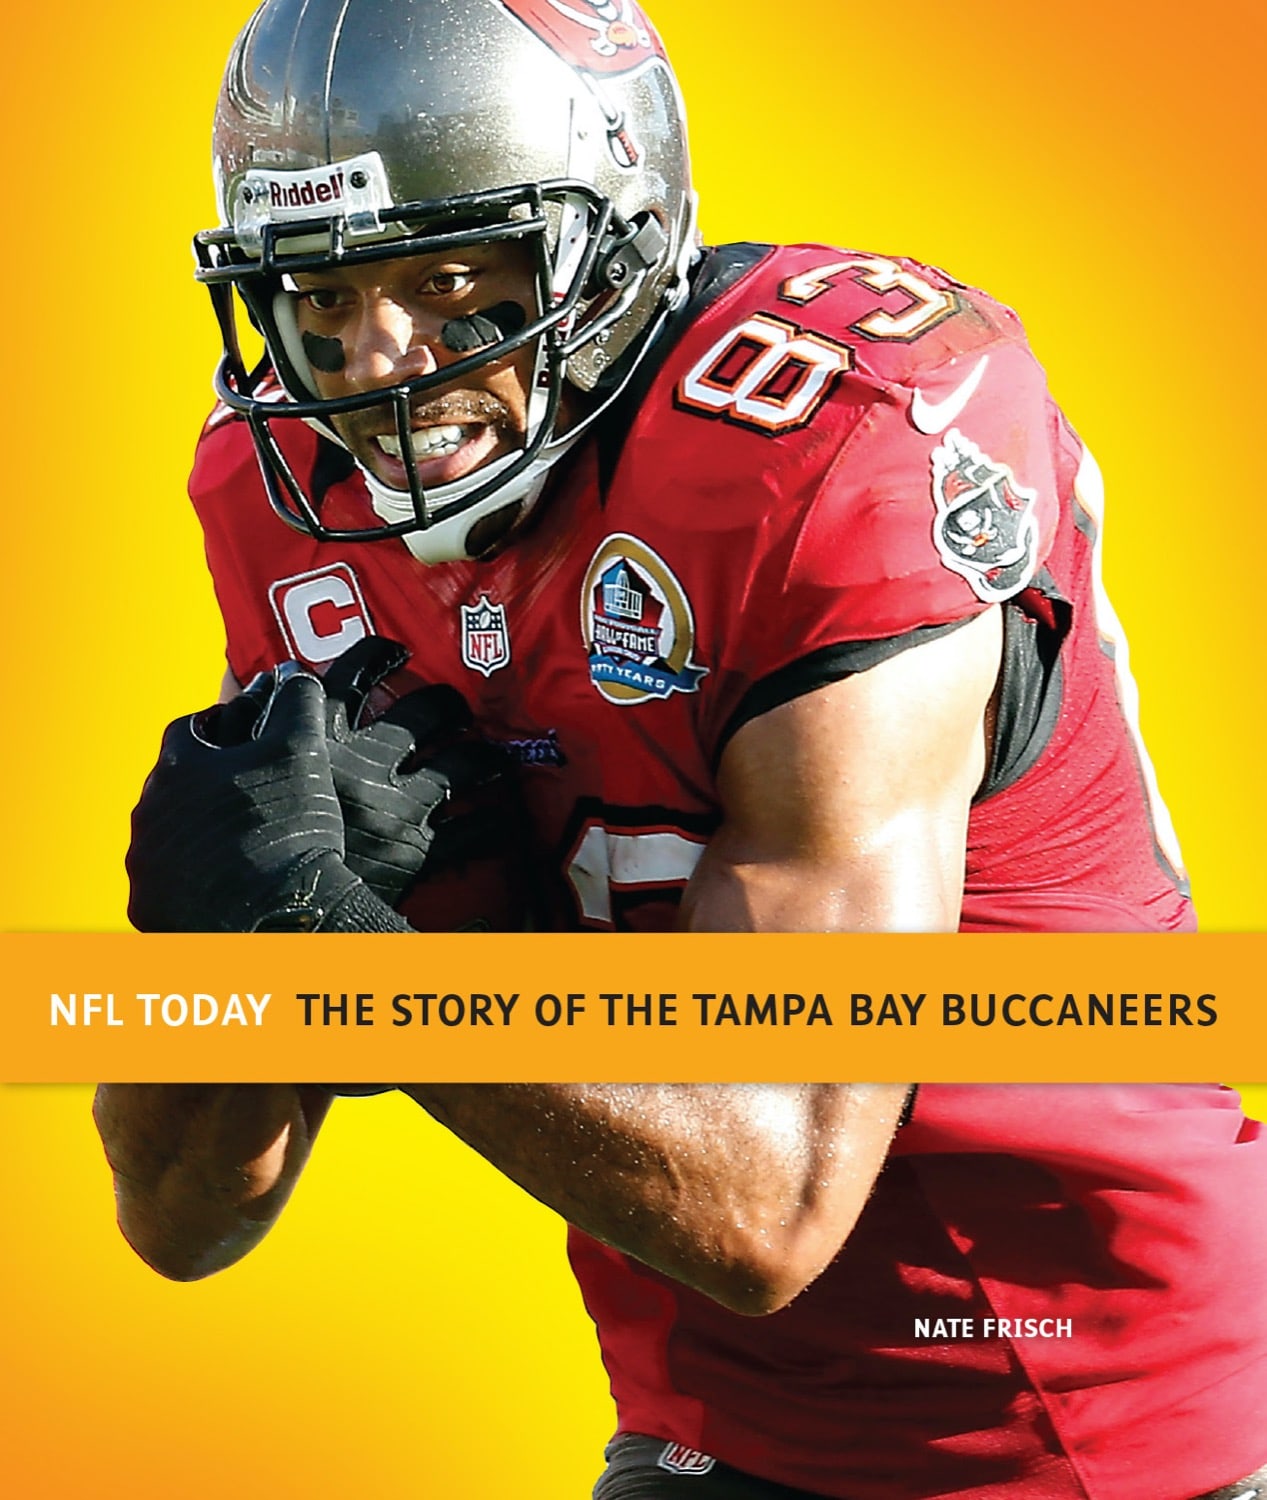 NFL Today: The Story of the Tampa Bay Buccaneers by The Creative Company Shop